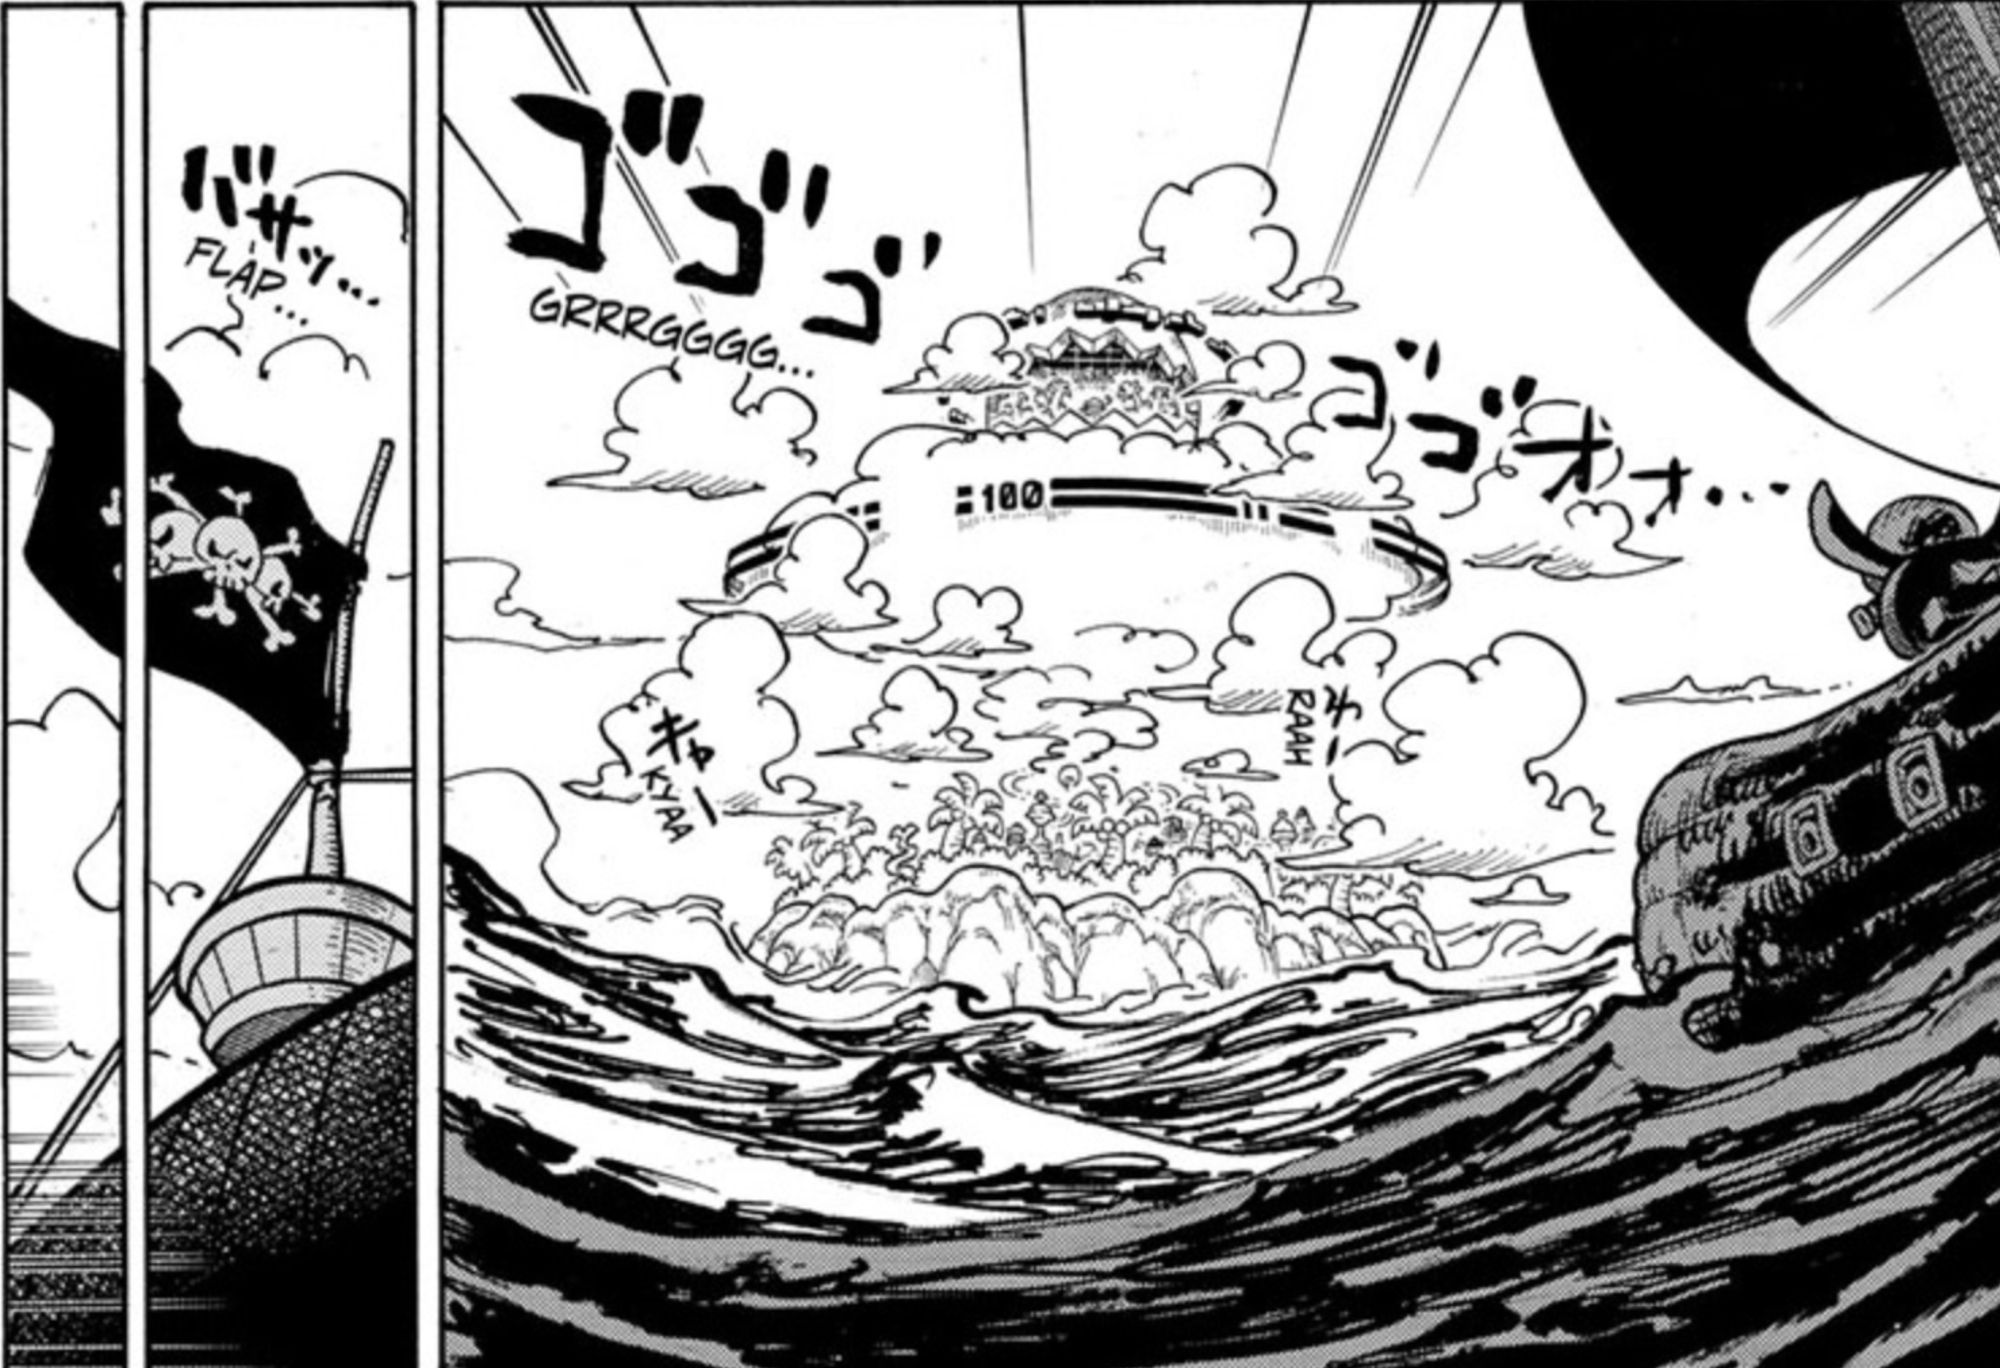 Manga panels from One Piece manga chapter 1079 shows a pirate ship with the Blackbeard jolly roger approaching Egghead Island.